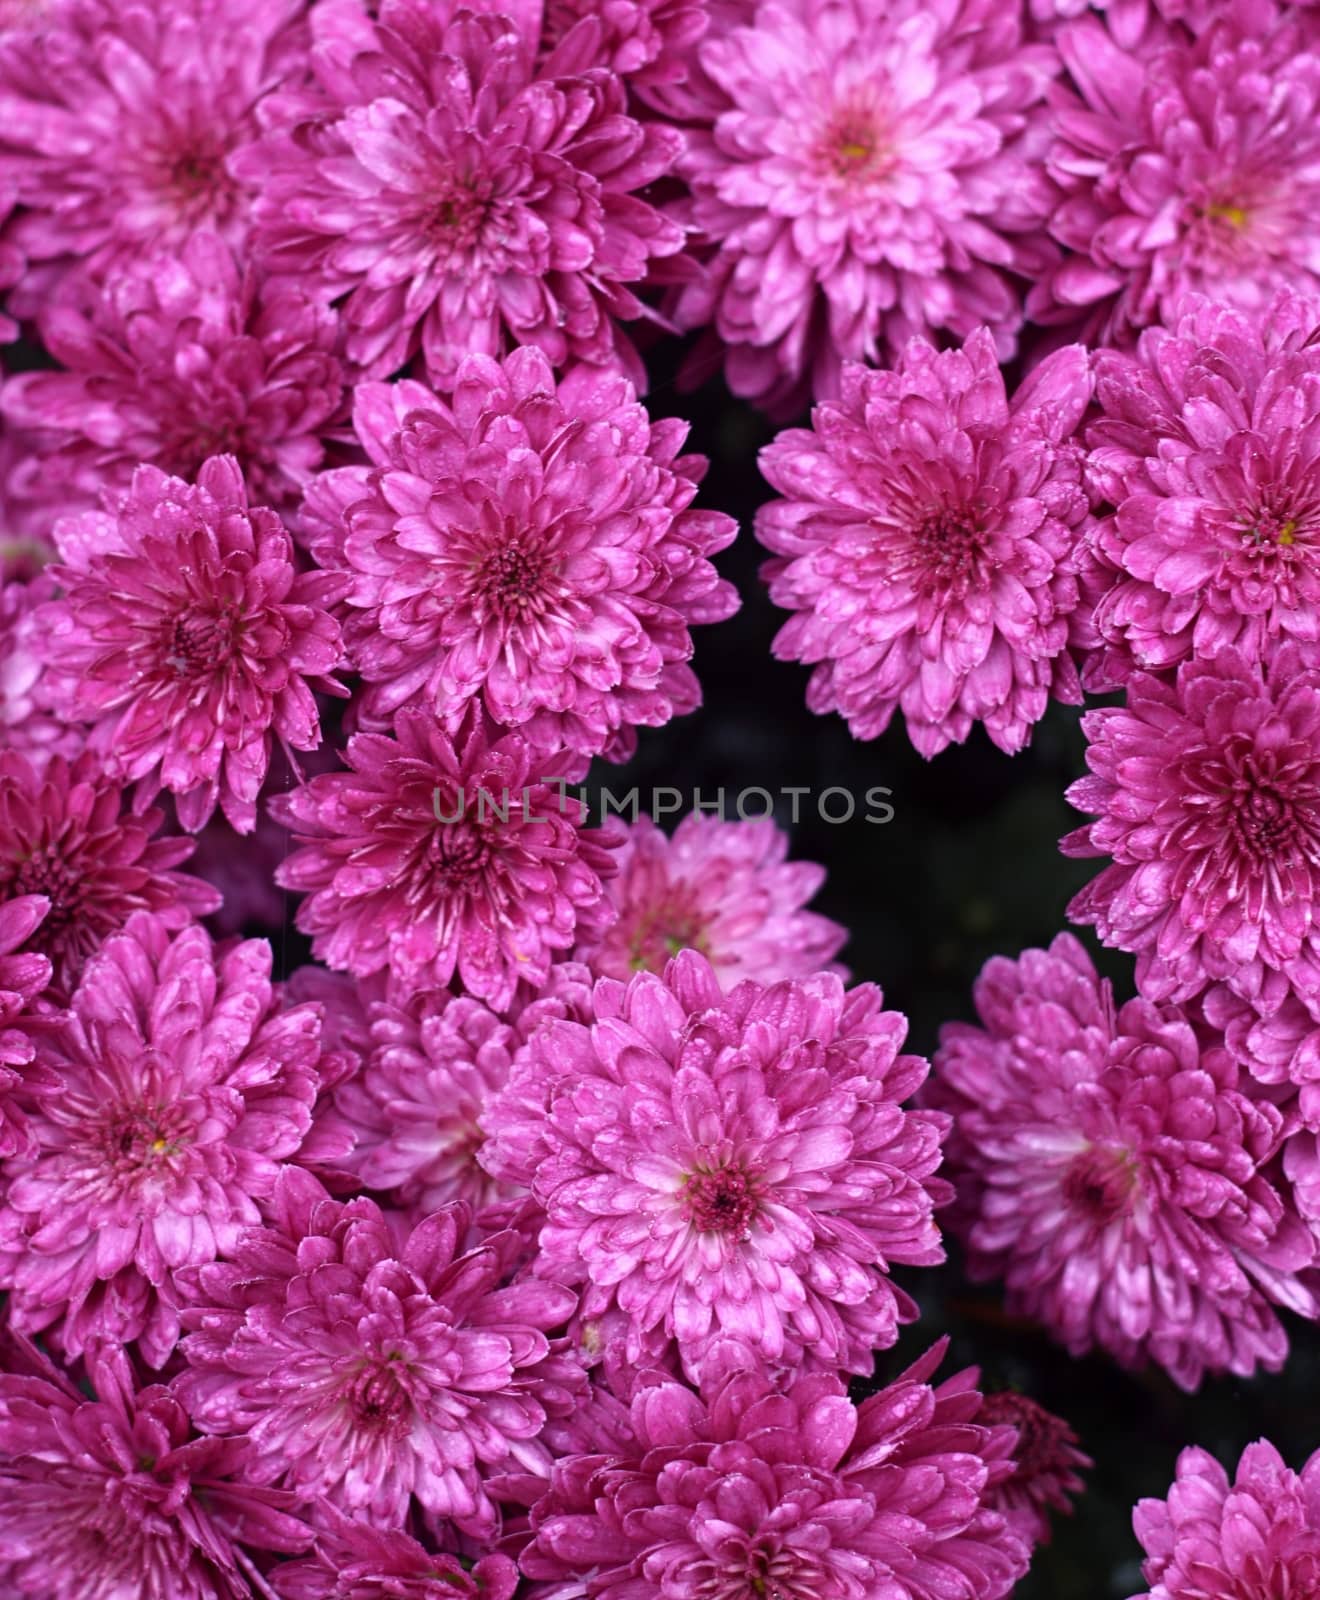 Many Violet  asters on the garden  with black background